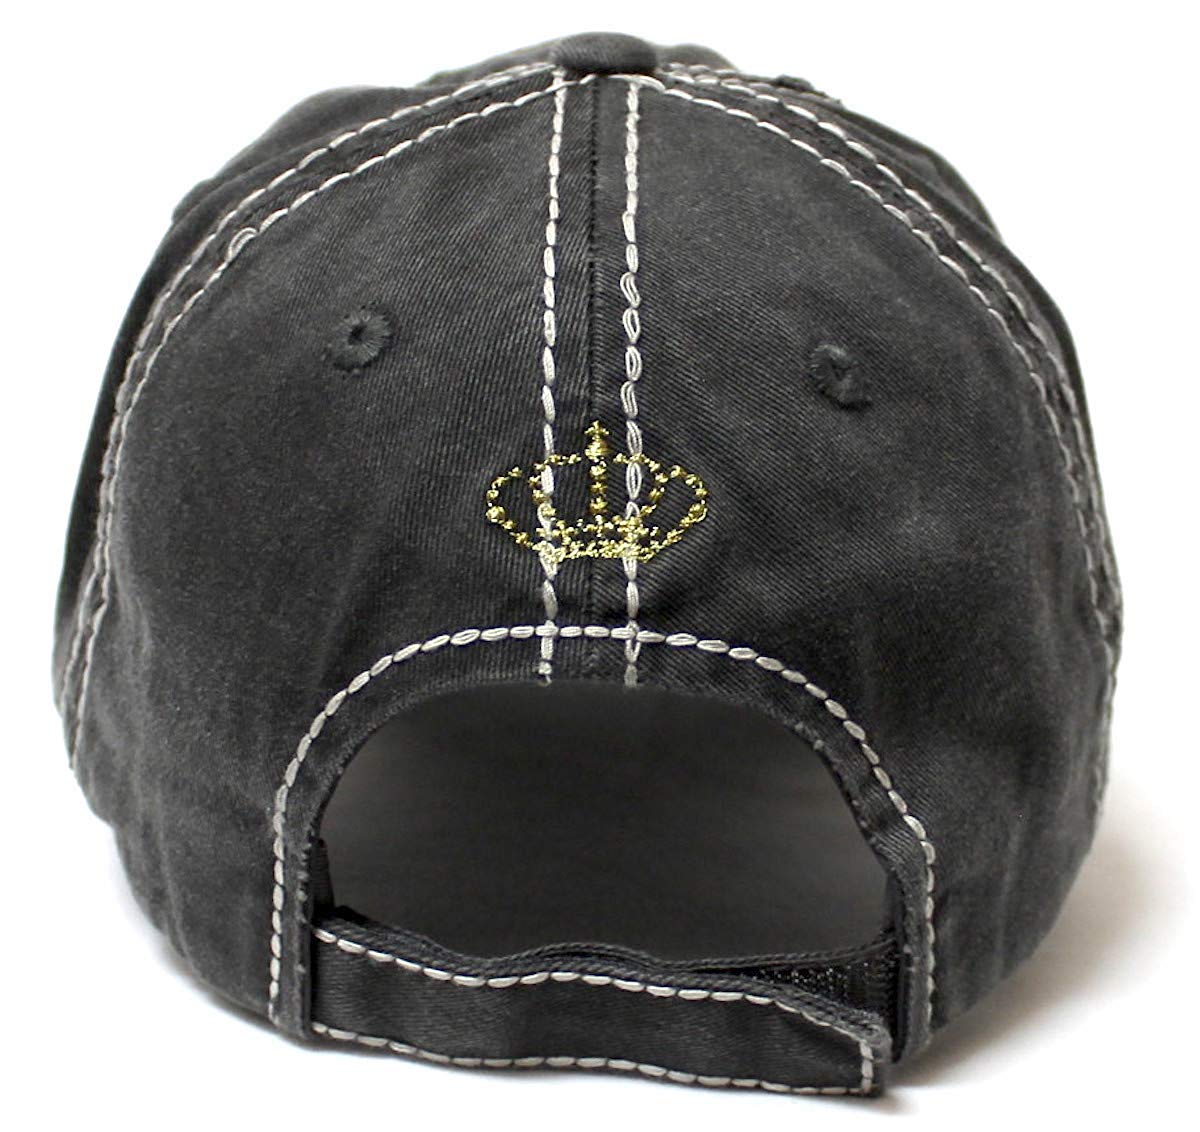 Women's Adjustable Ballcap Coffee Queen Royalty Patch Embroidery, Blk - Caps 'N Vintage 